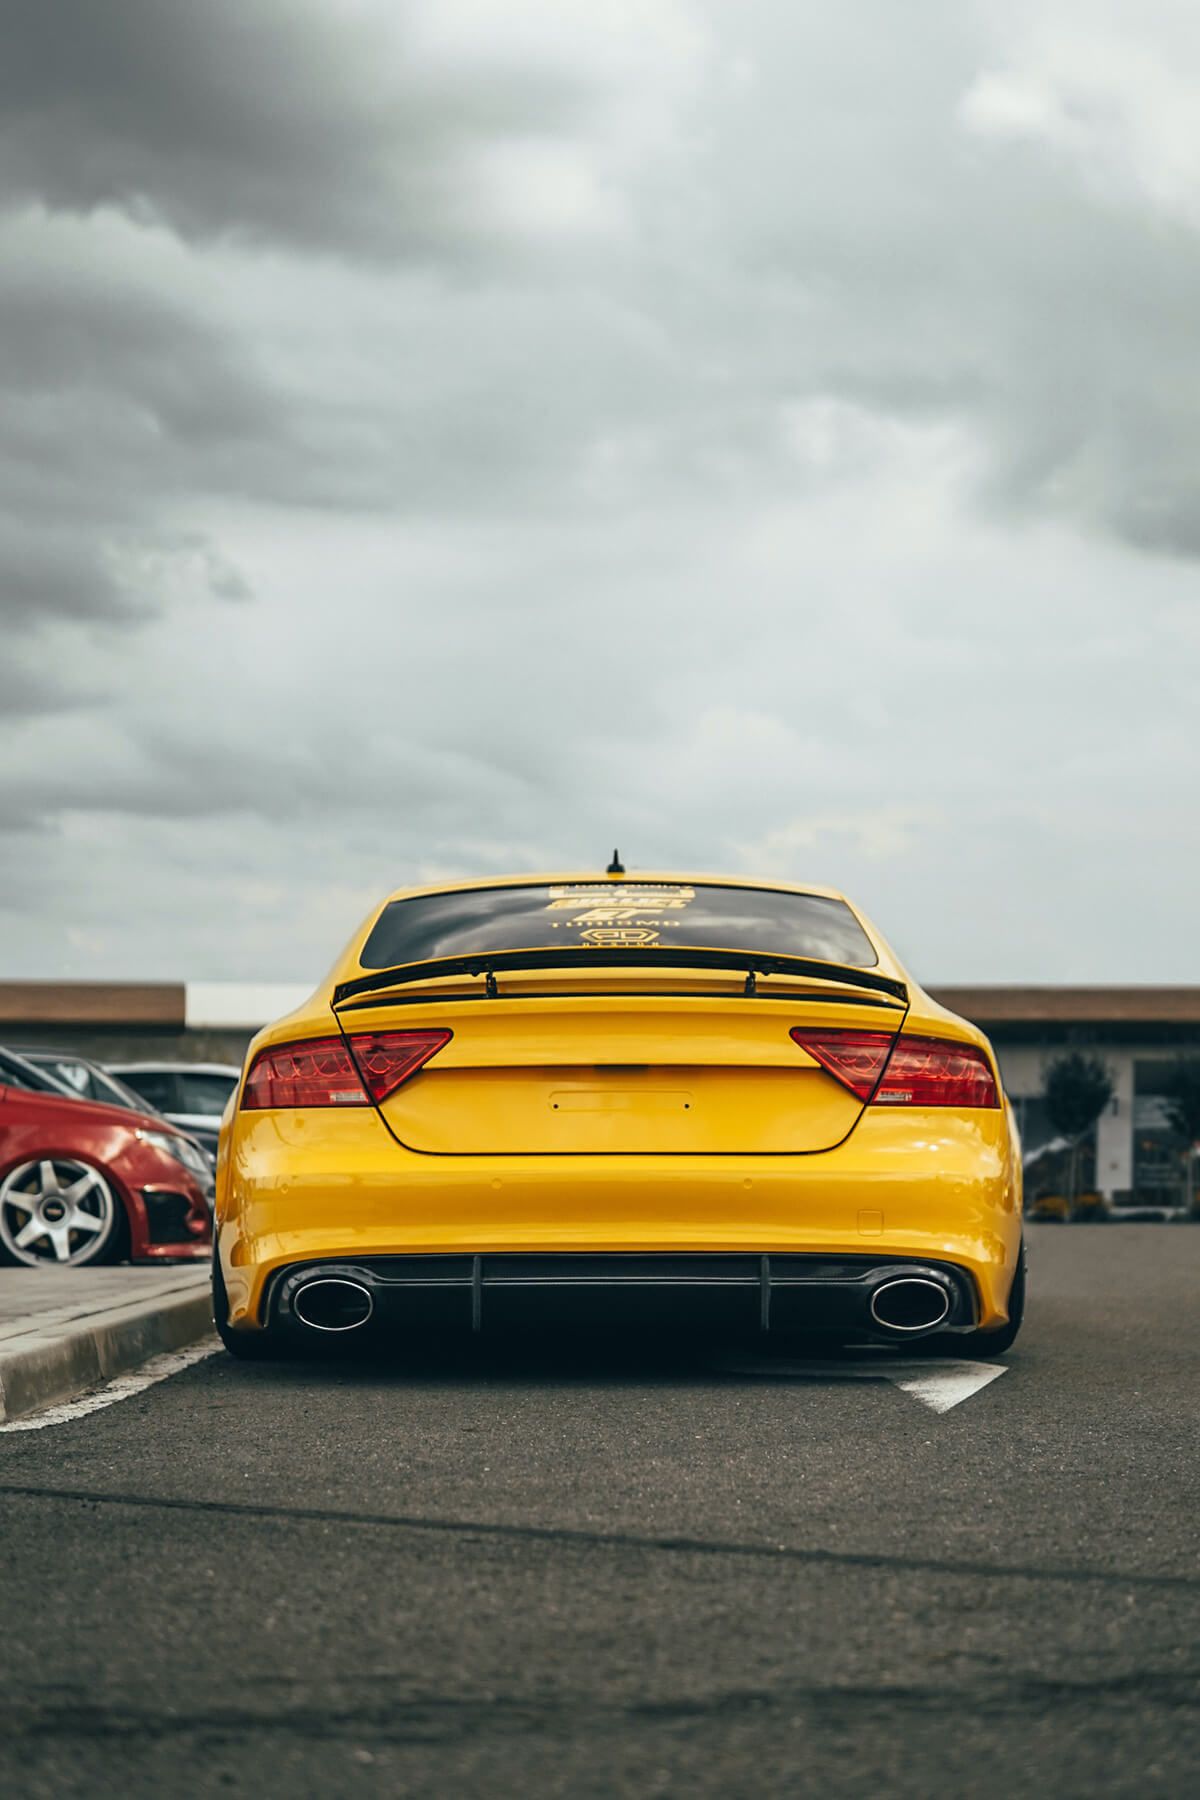 Lowered audi a7 trunk spoiler and dual exhaust